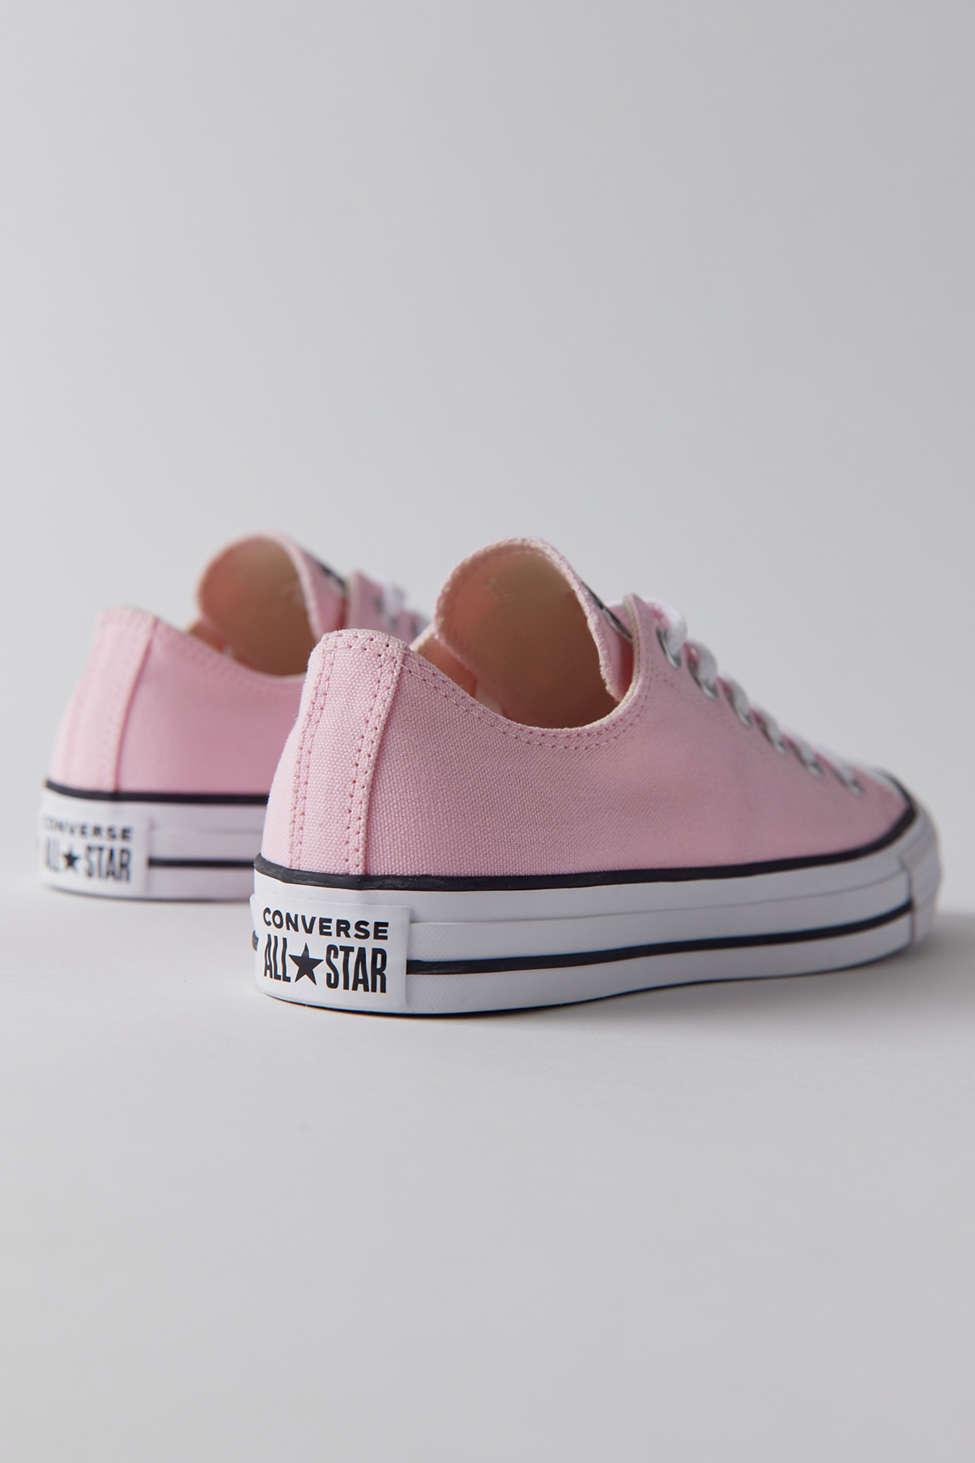 Converse Chuck Taylor All Star Seasonal Color Low Top Sneaker in Pink | Lyst